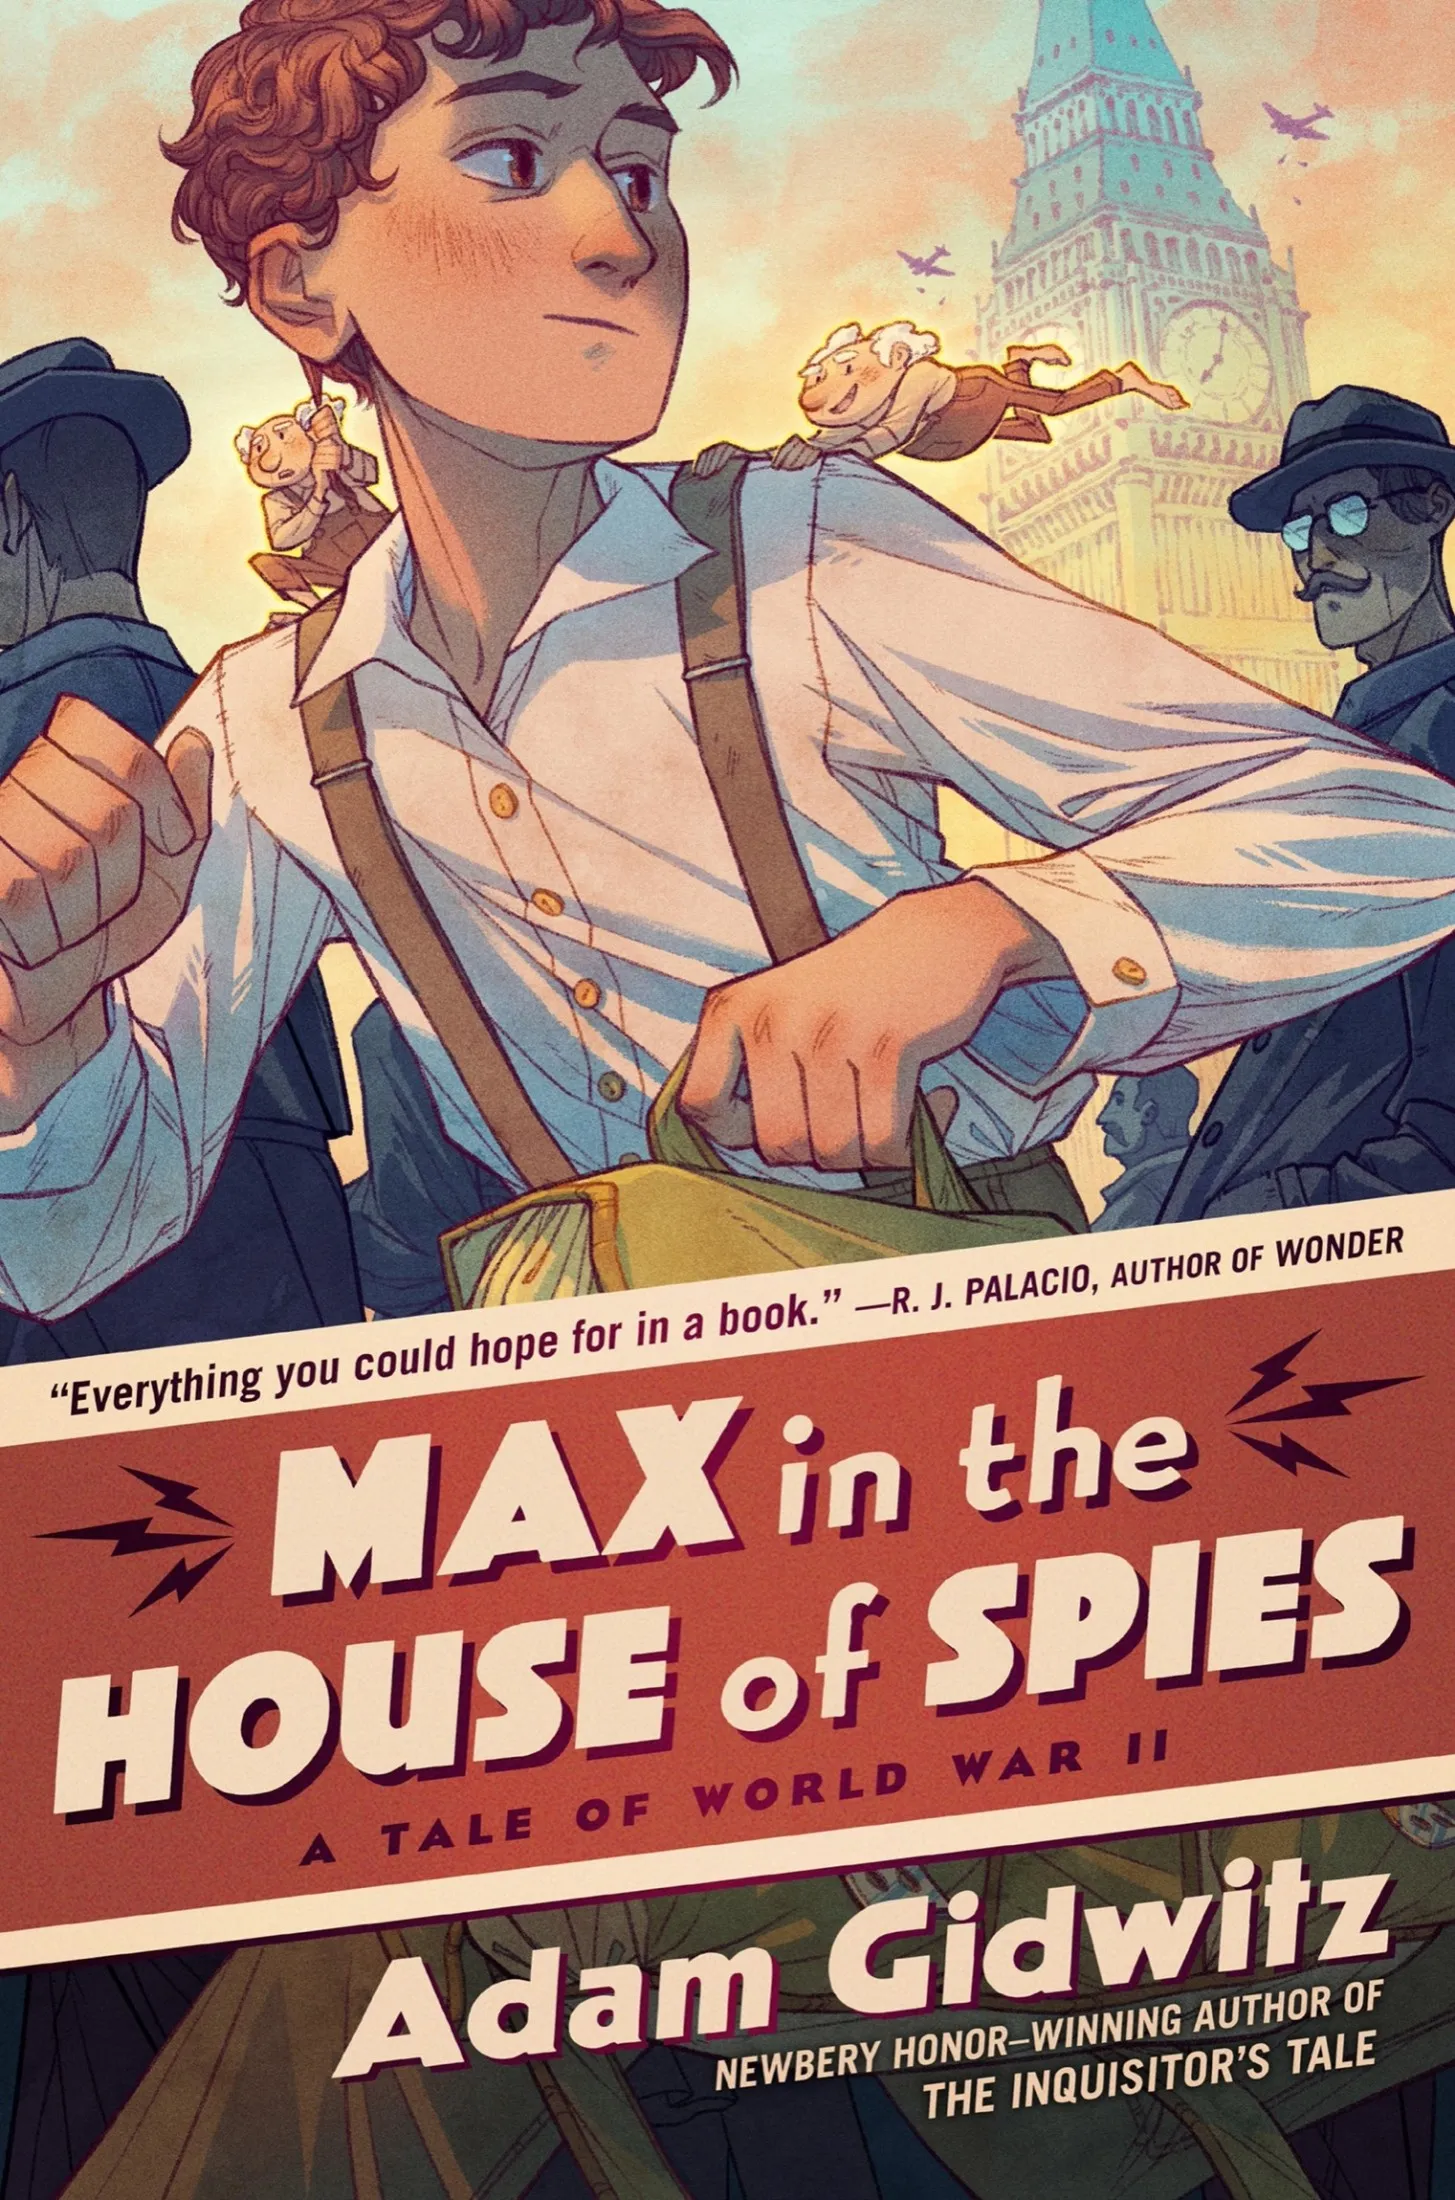 Max in the House of Spies: A Tale of World War II (Operation Kinderspion)